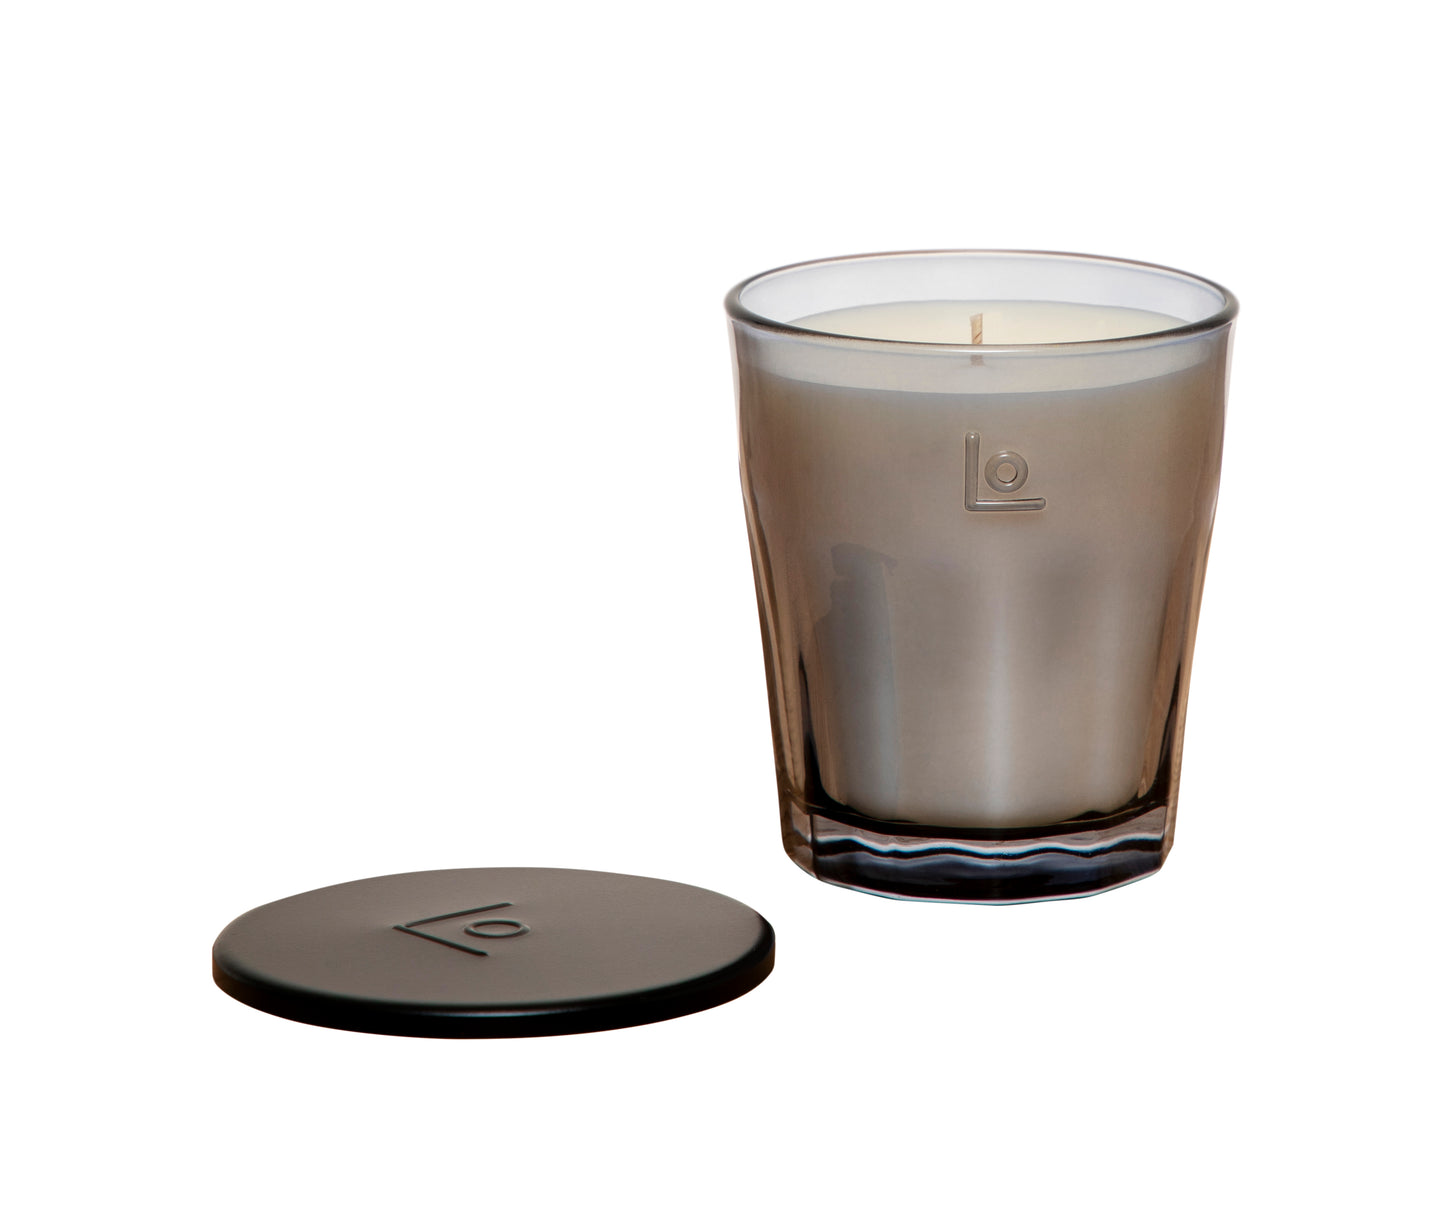 LO. Studio Pathless Wood 220g Scented Candle